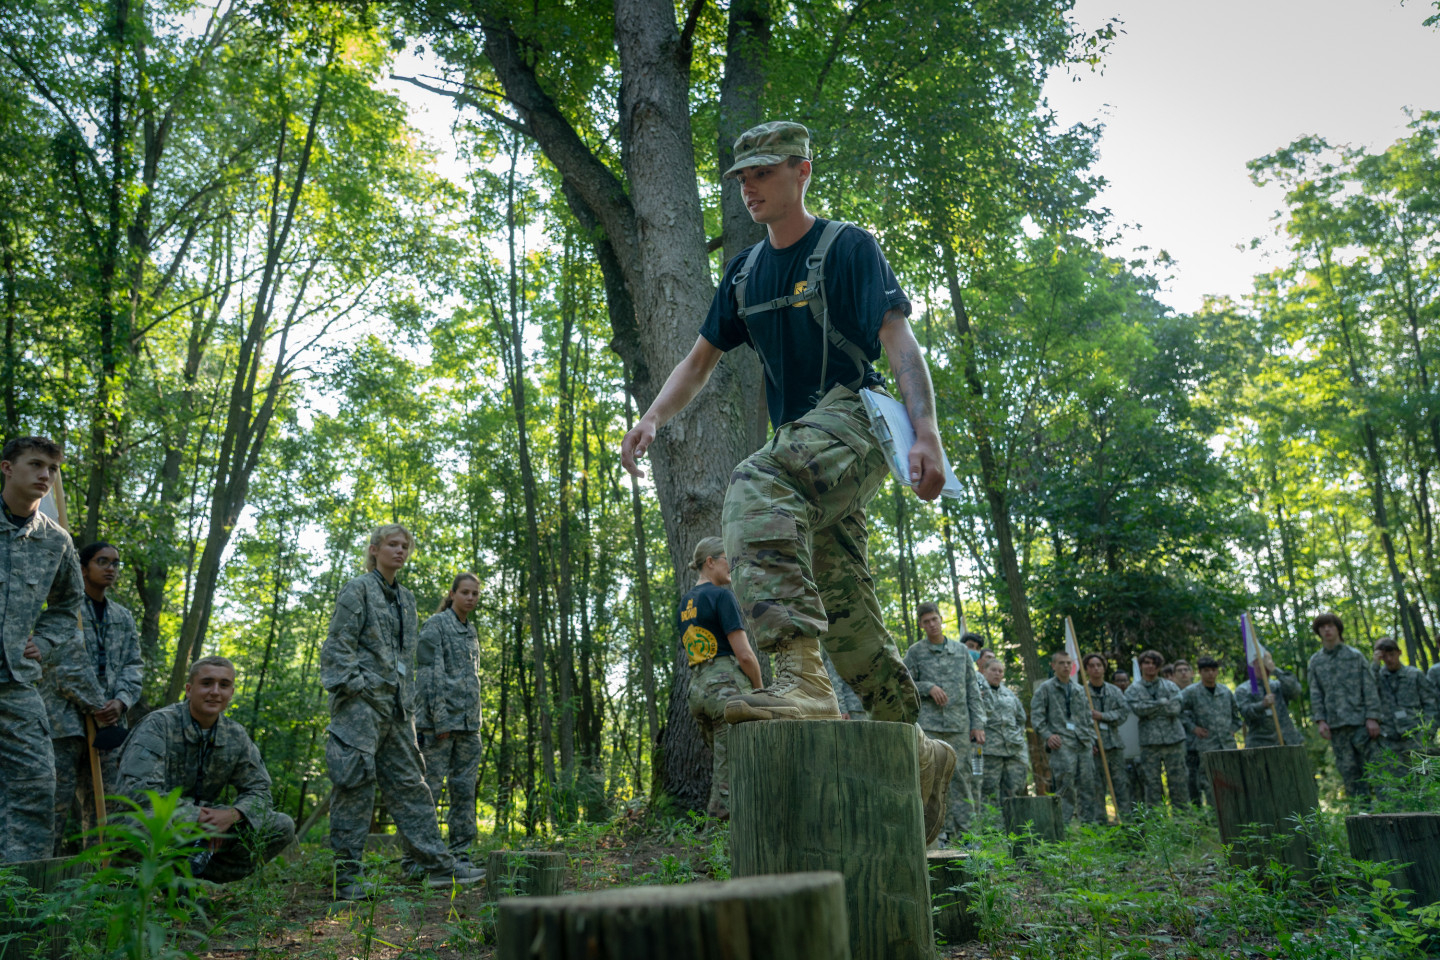 An ROTC cadet walks across stumps in an obstacle course.